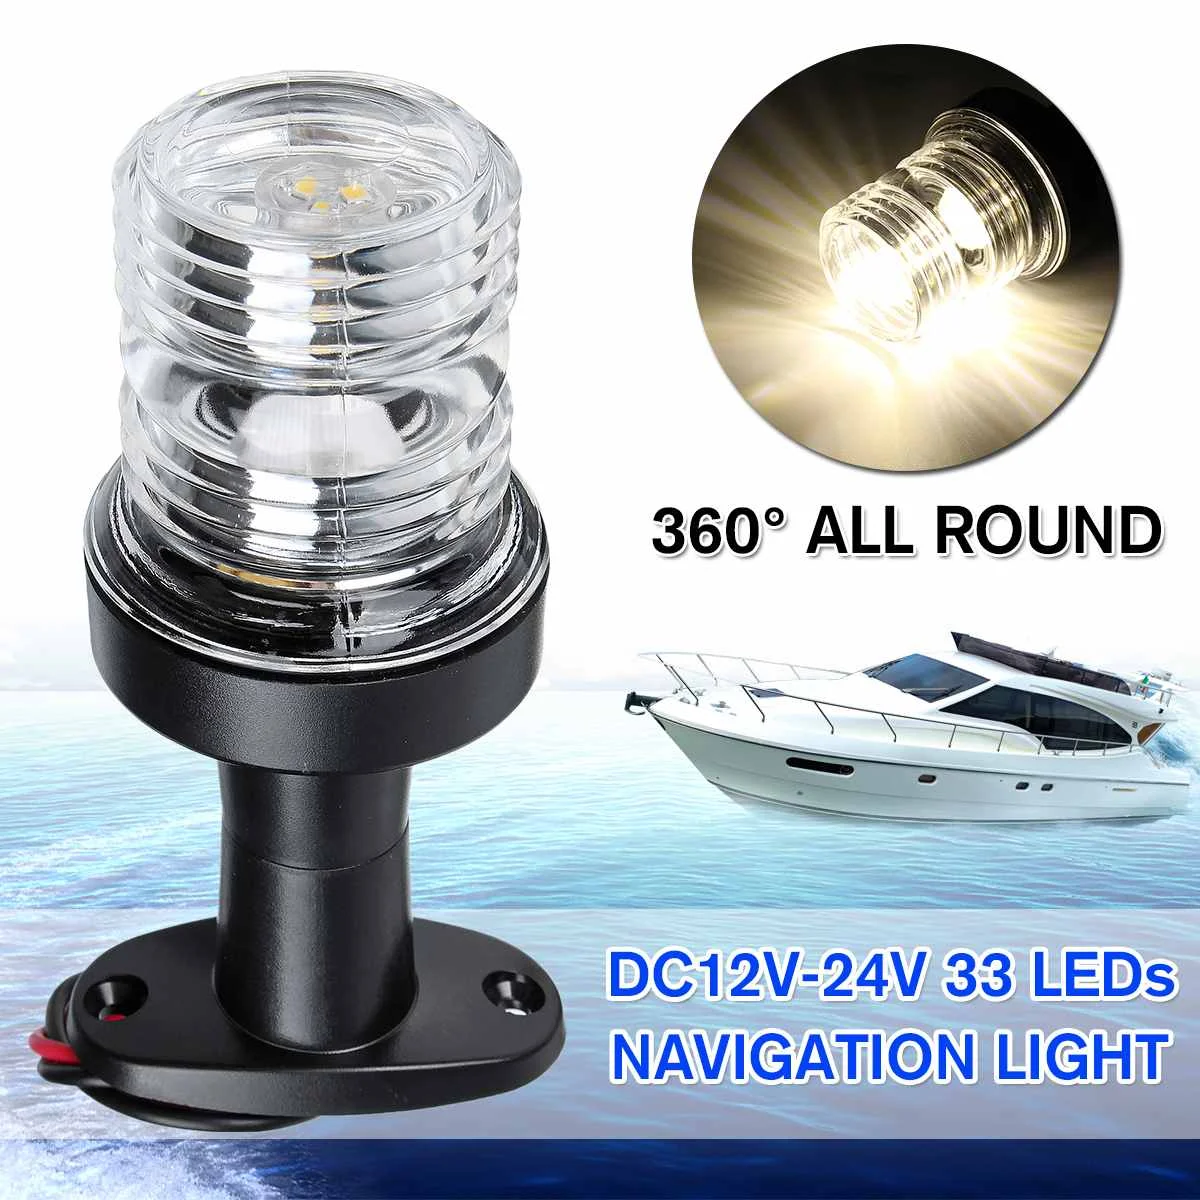 12V DC Car Signal Indicator Marine Boat Yacht Stern Anchor LED Navigation Light All Round 360°White Light Auto Accessories 